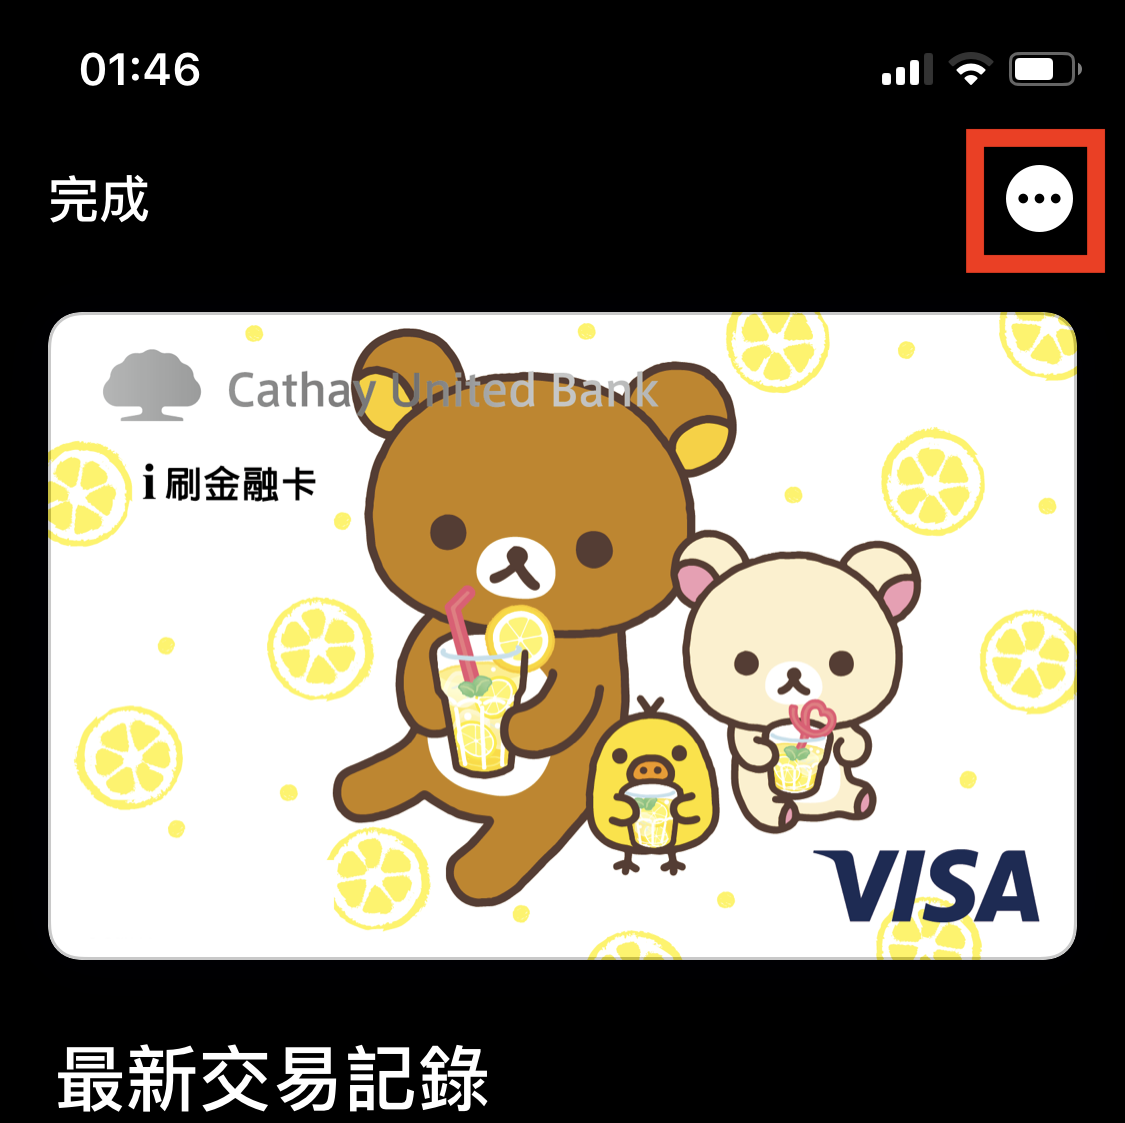 go to the wallet card setting page